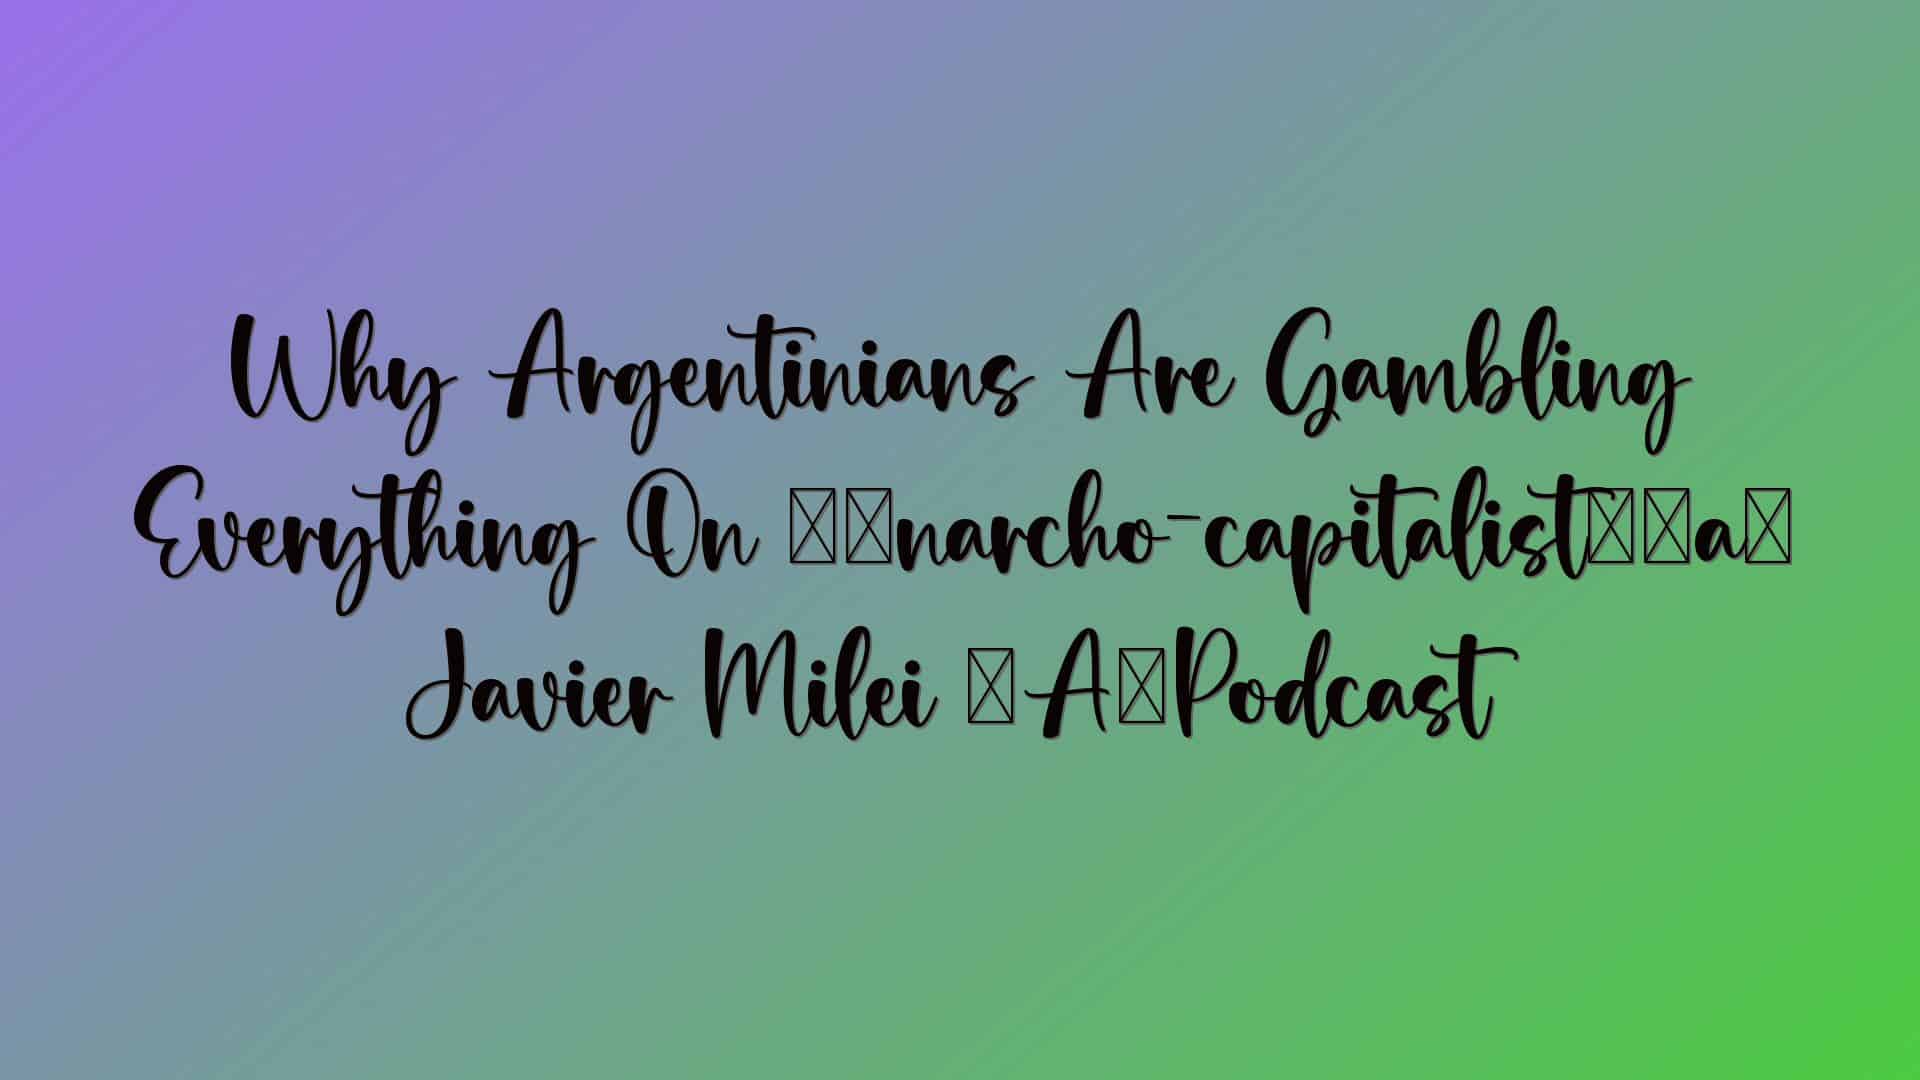 Why Argentinians Are Gambling Everything On ‘anarcho-capitalist’ Javier Milei – Podcast